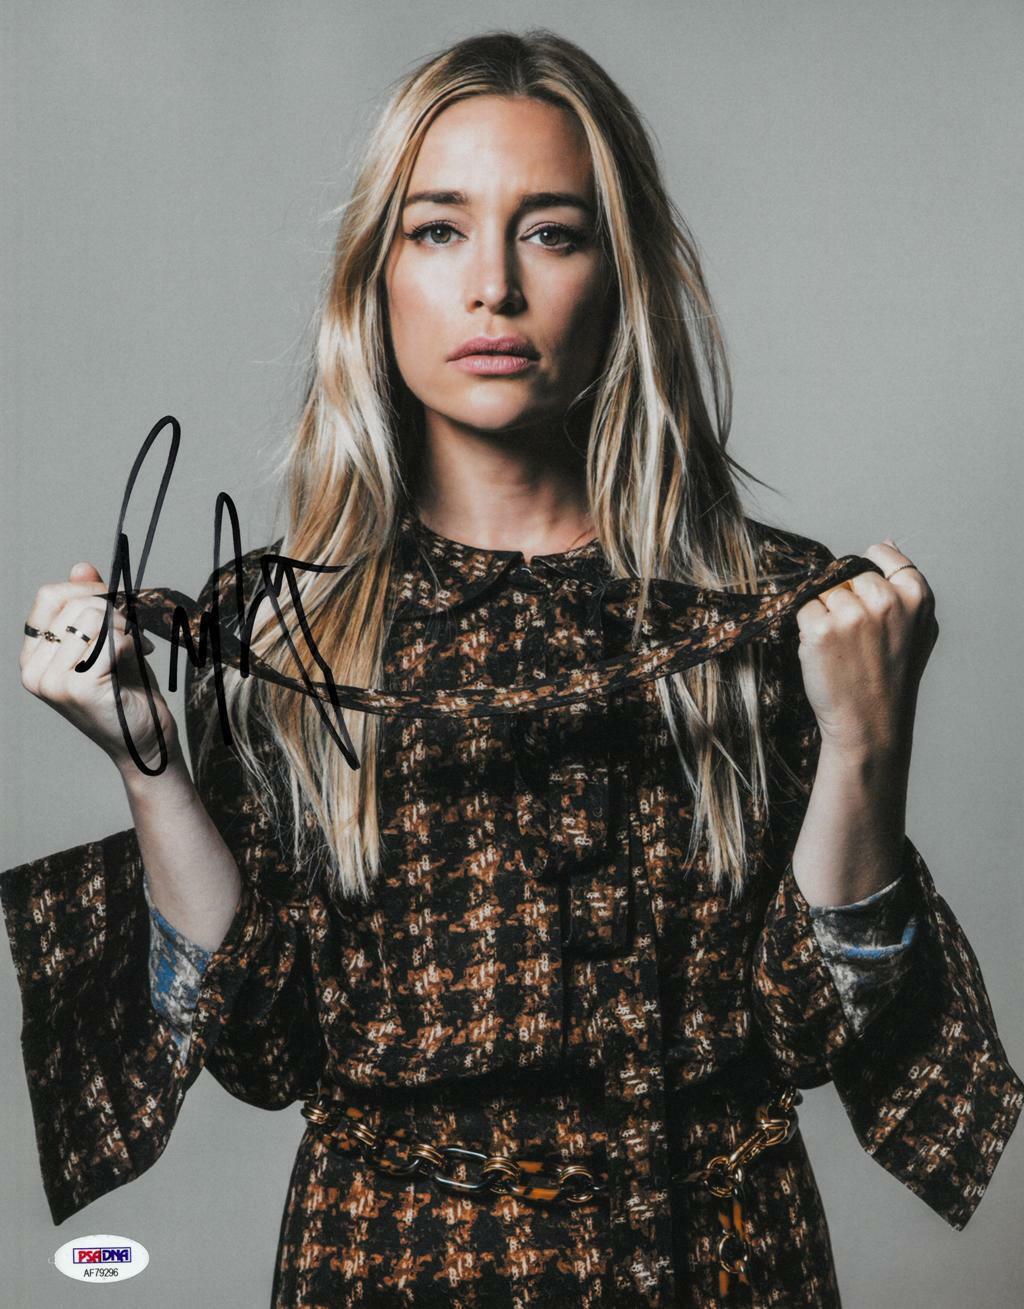 Piper Perabo Signed Authentic Autographed 11x14 Photo Poster painting PSA/DNA #AF79296